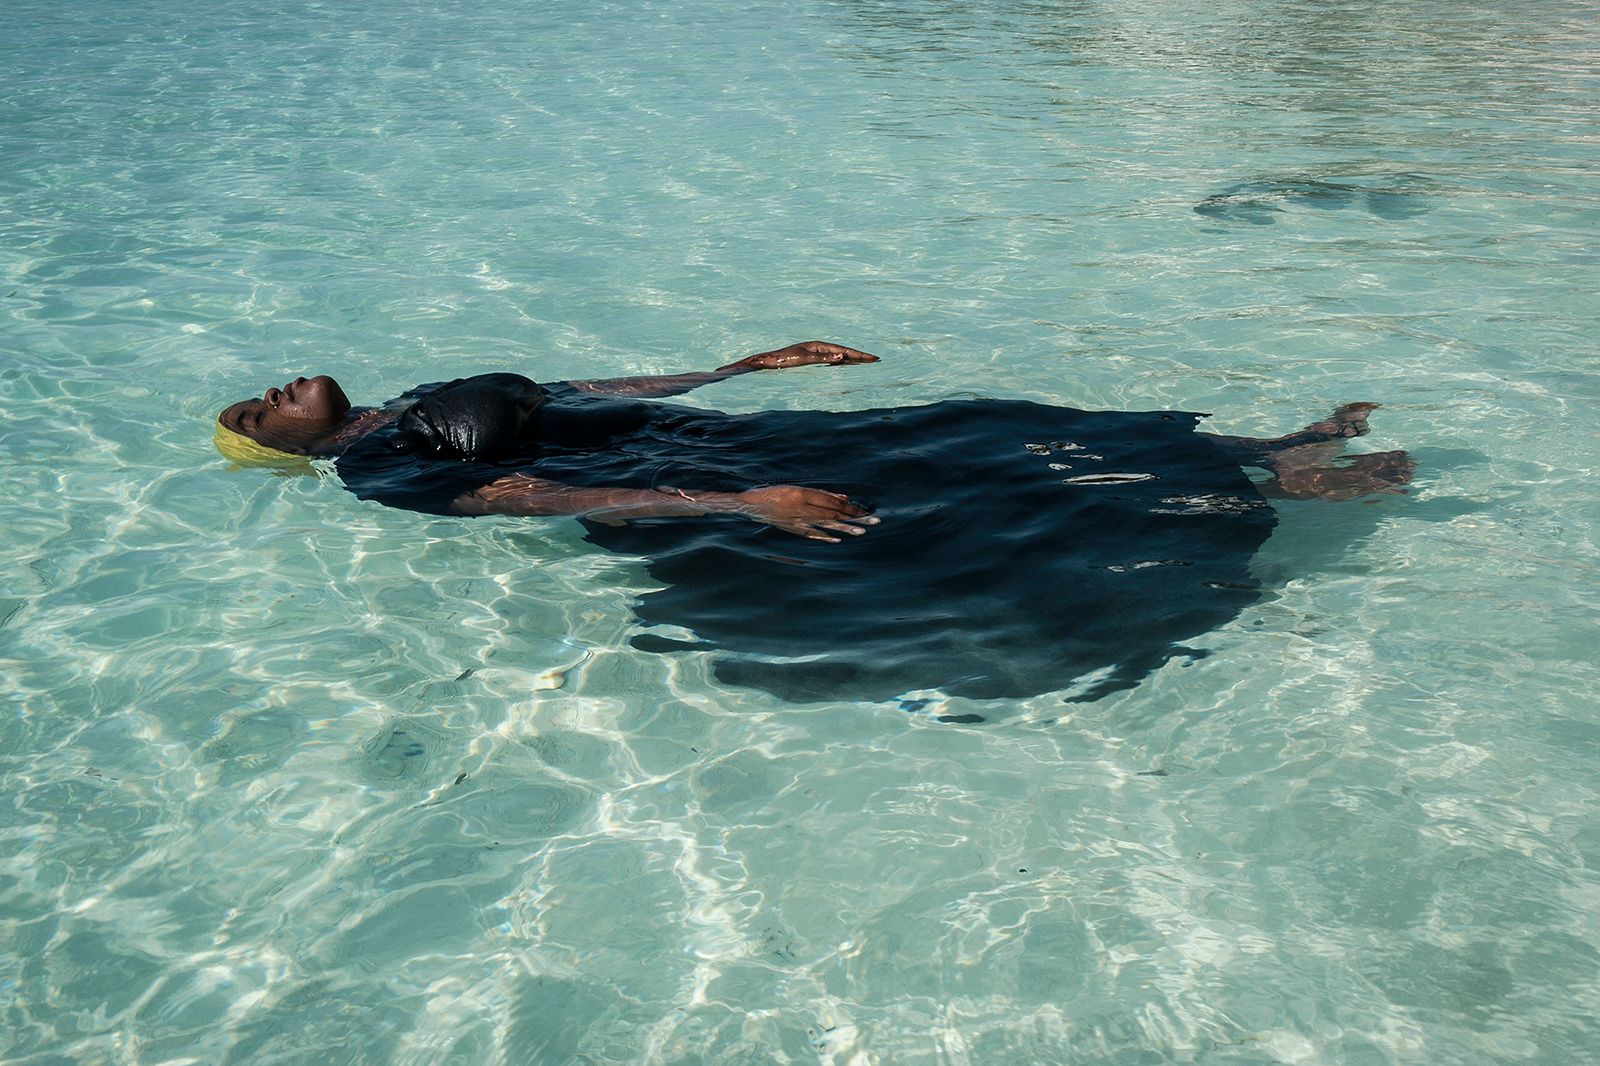 © Anna Boyiazis - A young woman learns to float in the Indian Ocean off of Nungwi, Zanzibar.